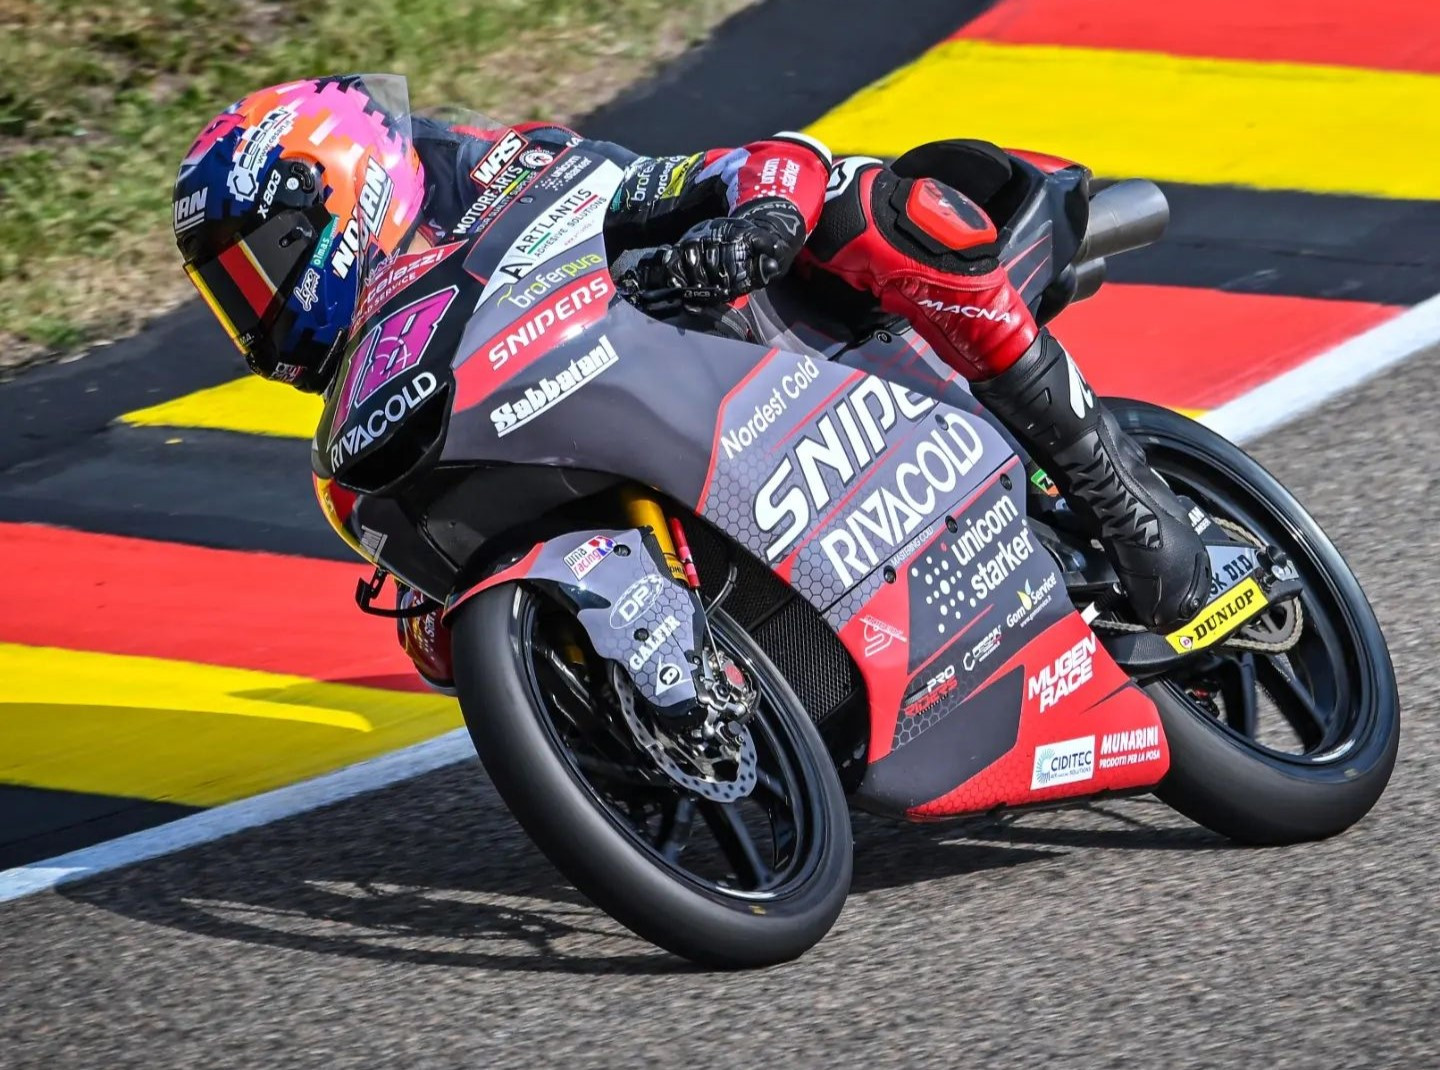 Matteo Bertelle (18), as seen during FP1 at Sachsenring. Photo courtesy Rivacold Snipers Team.